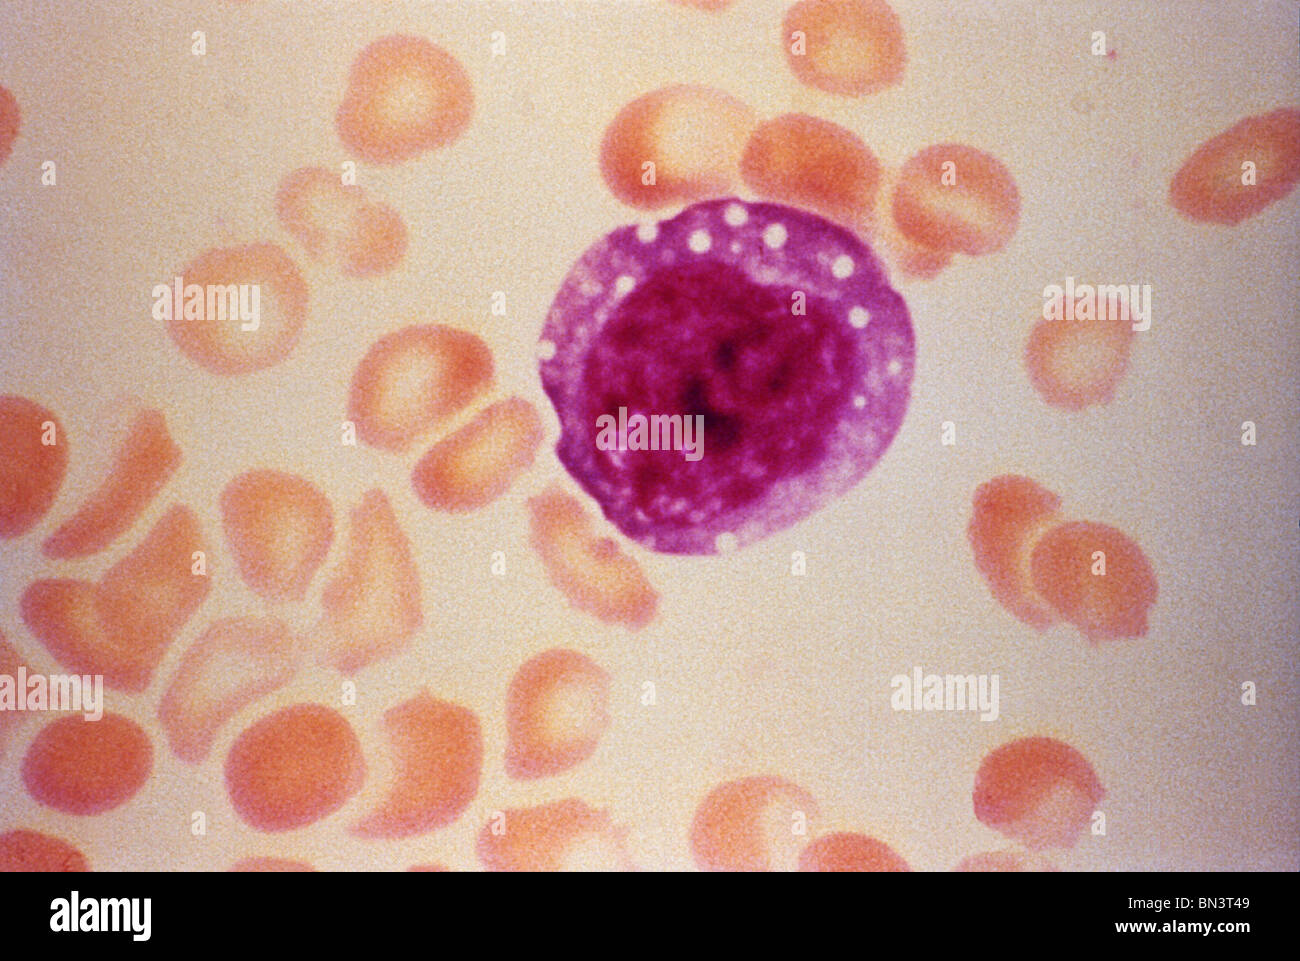 Micrograph of an atypical enlarged lymphocyte found in the blood smear from a patient with Henoch-Schönlein purpura (HPS) Stock Photo